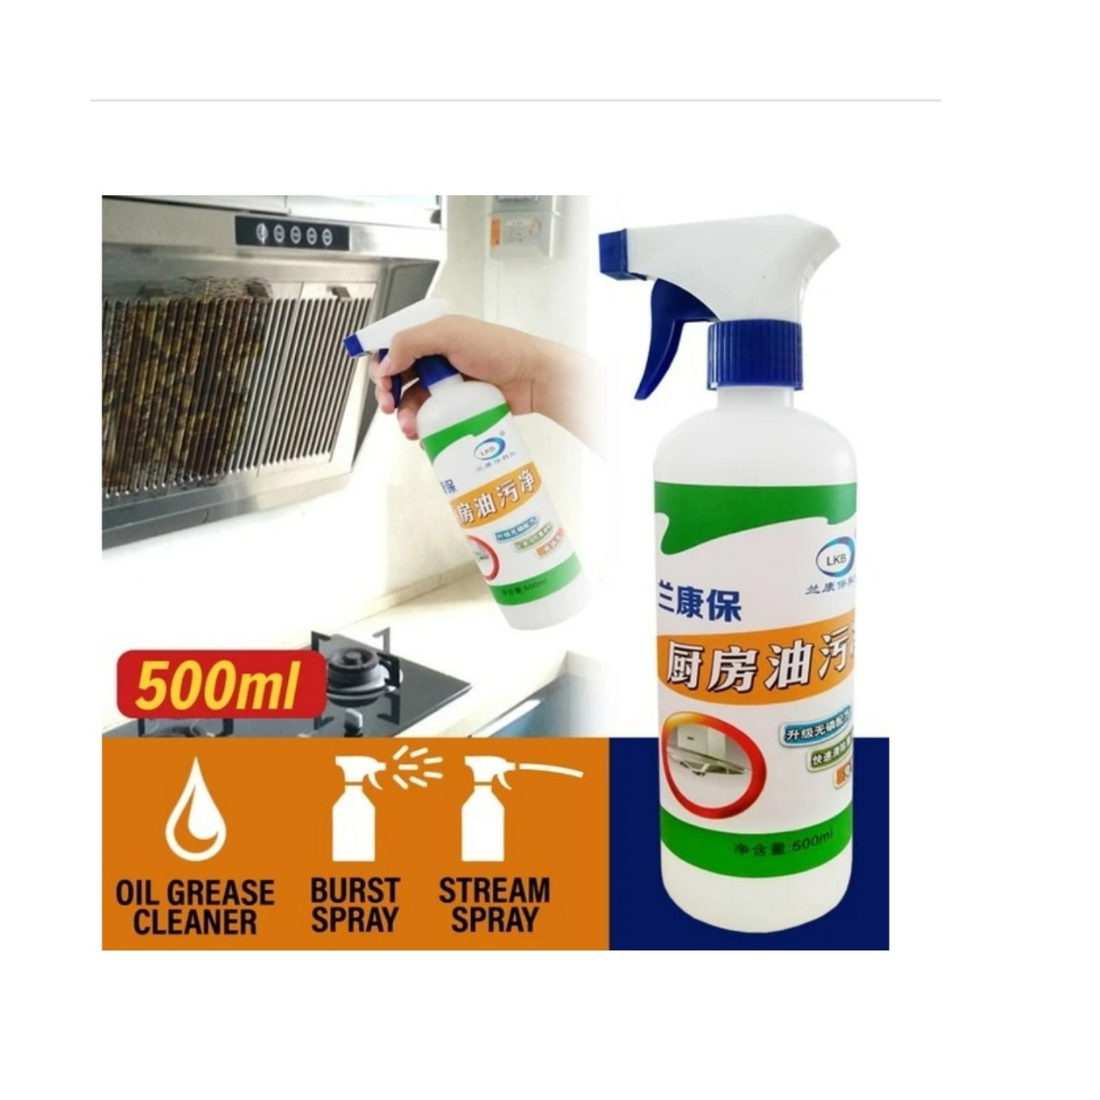 SUMANGALAA Multipurpose Kitchen Cleaner, KITCHEN OIL AND GREASE STAIN CLEANER, GAS STOVE & CHIMNY OIL CLEANING SPRAY, NON TOXIC, 500 ML.